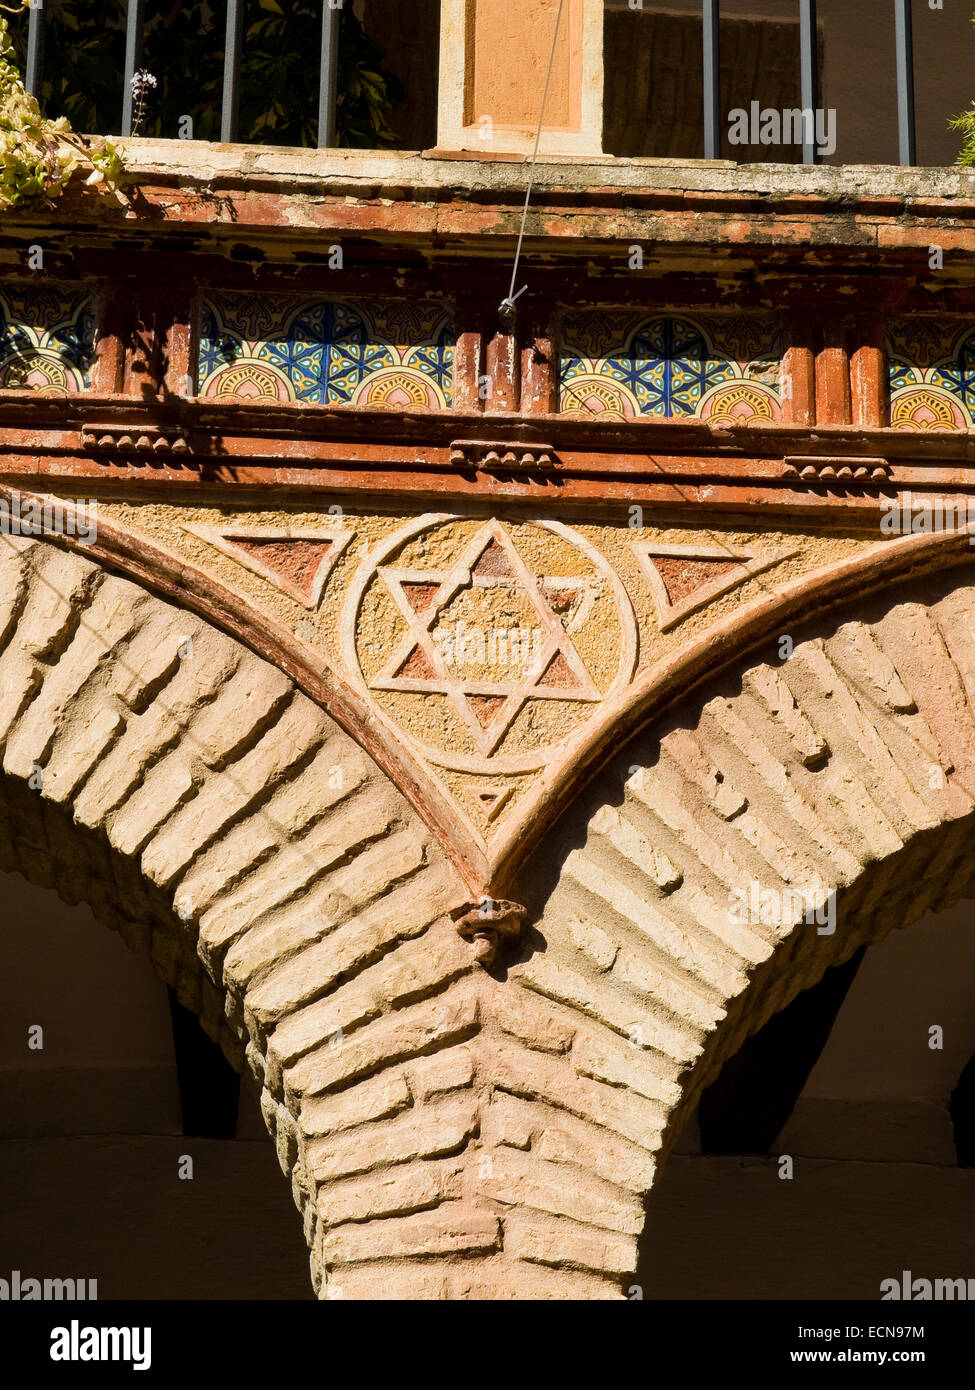 Jewish star in a street of old Europe. Stock Photo